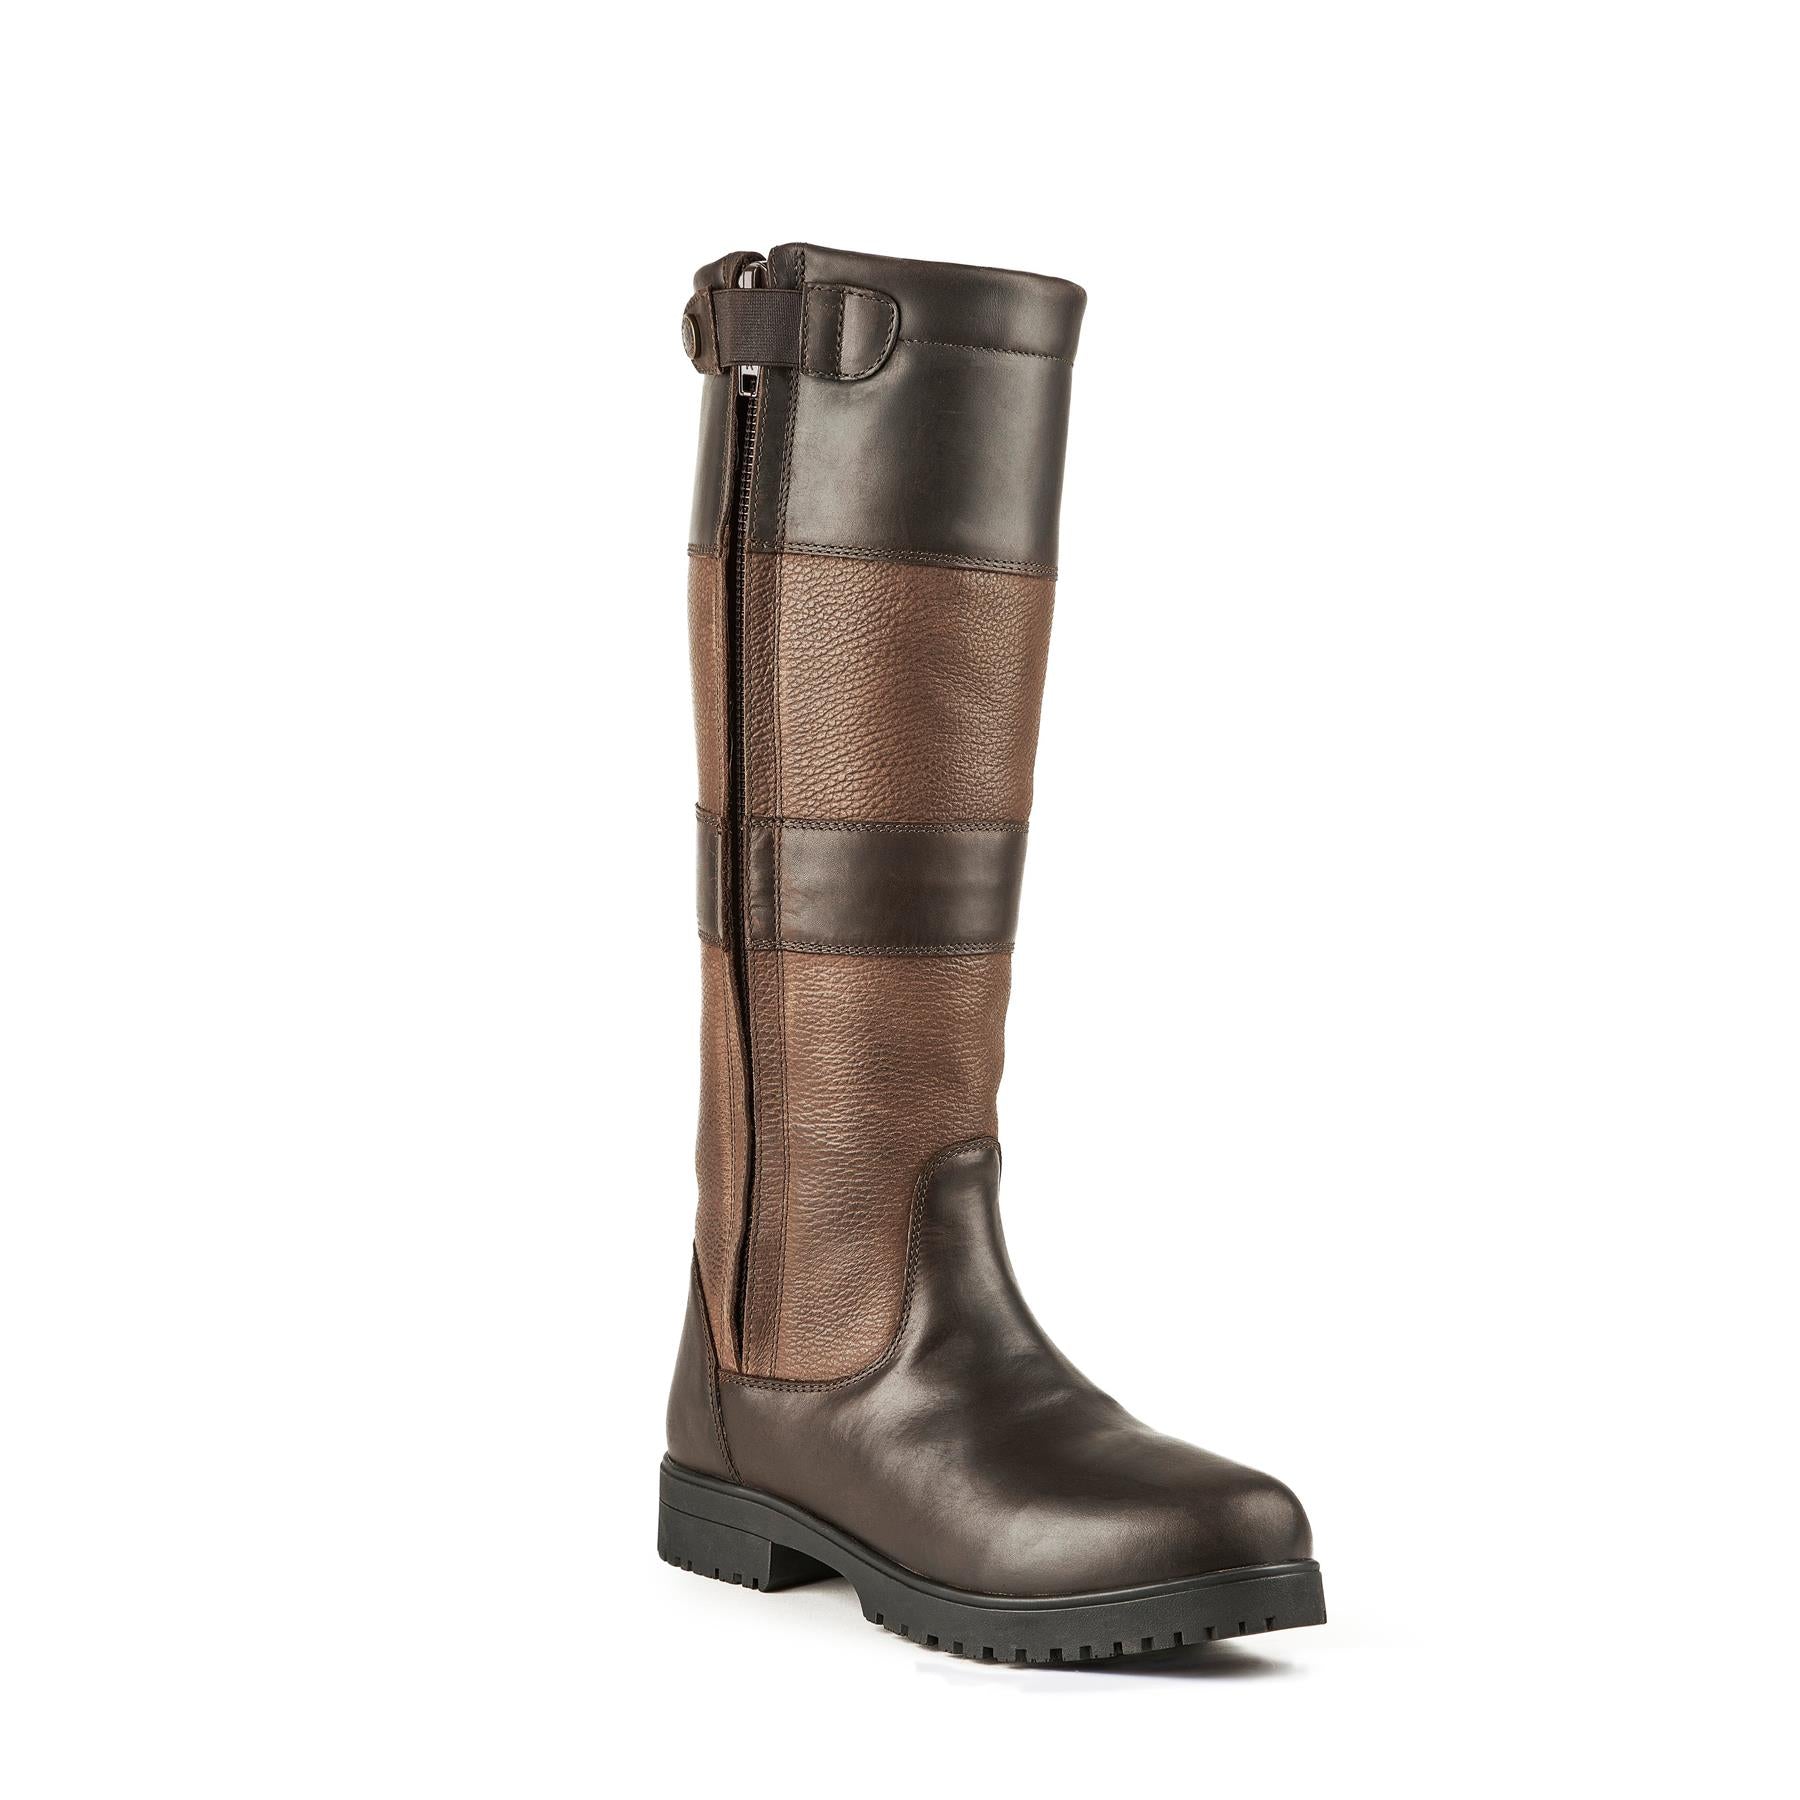 Shires Moretta Bella II Country Boots - Just Horse Riders